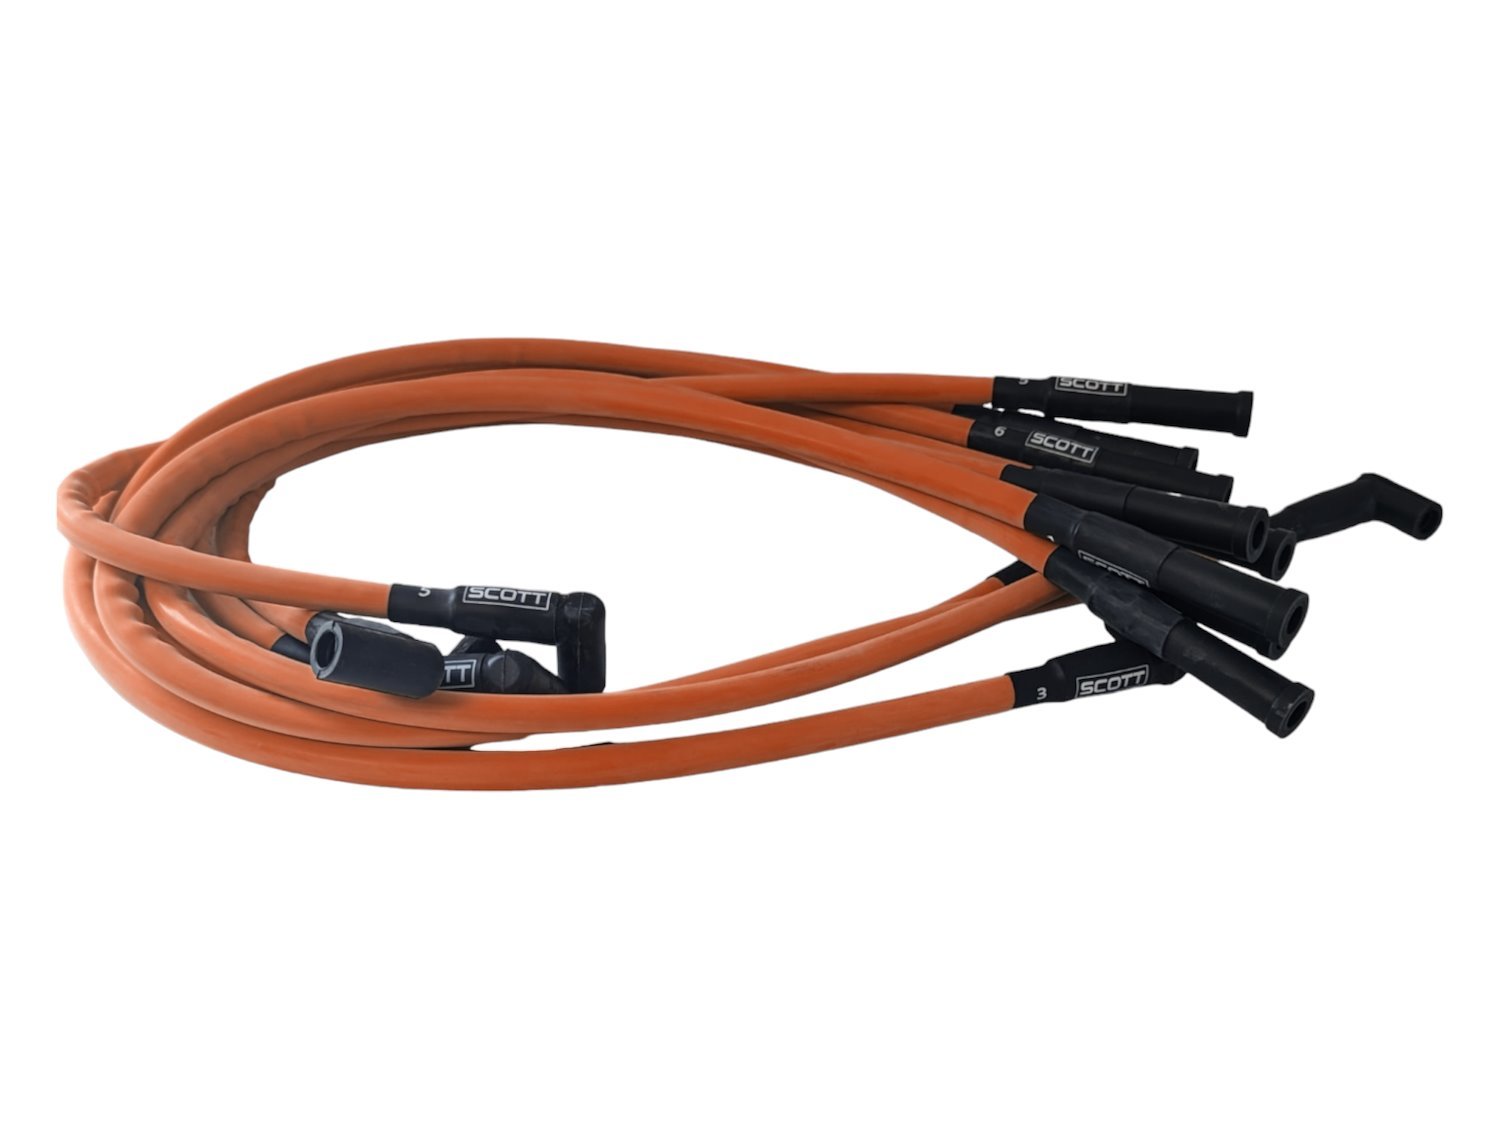 SPW-CH-421-9 High-Performance Silicone-Sleeved Spark Plug Wire Set for Small Block Chevy, Over Valve Cover [Fluorescent Orange]